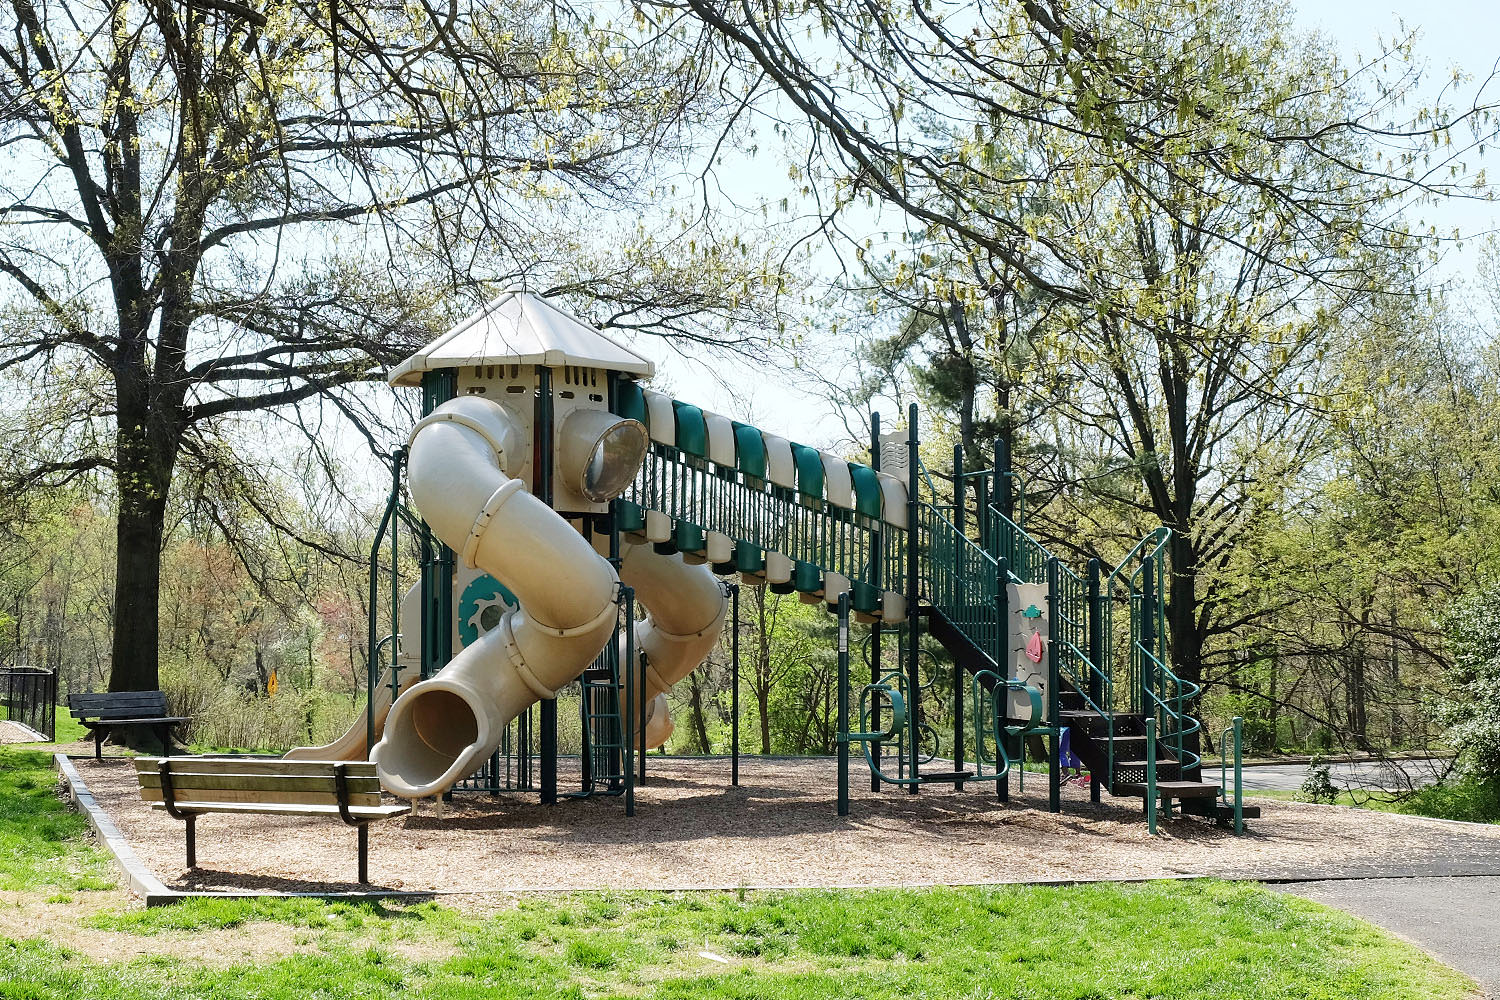 Golf Course Island offers one of Reston’s biggest playgrounds